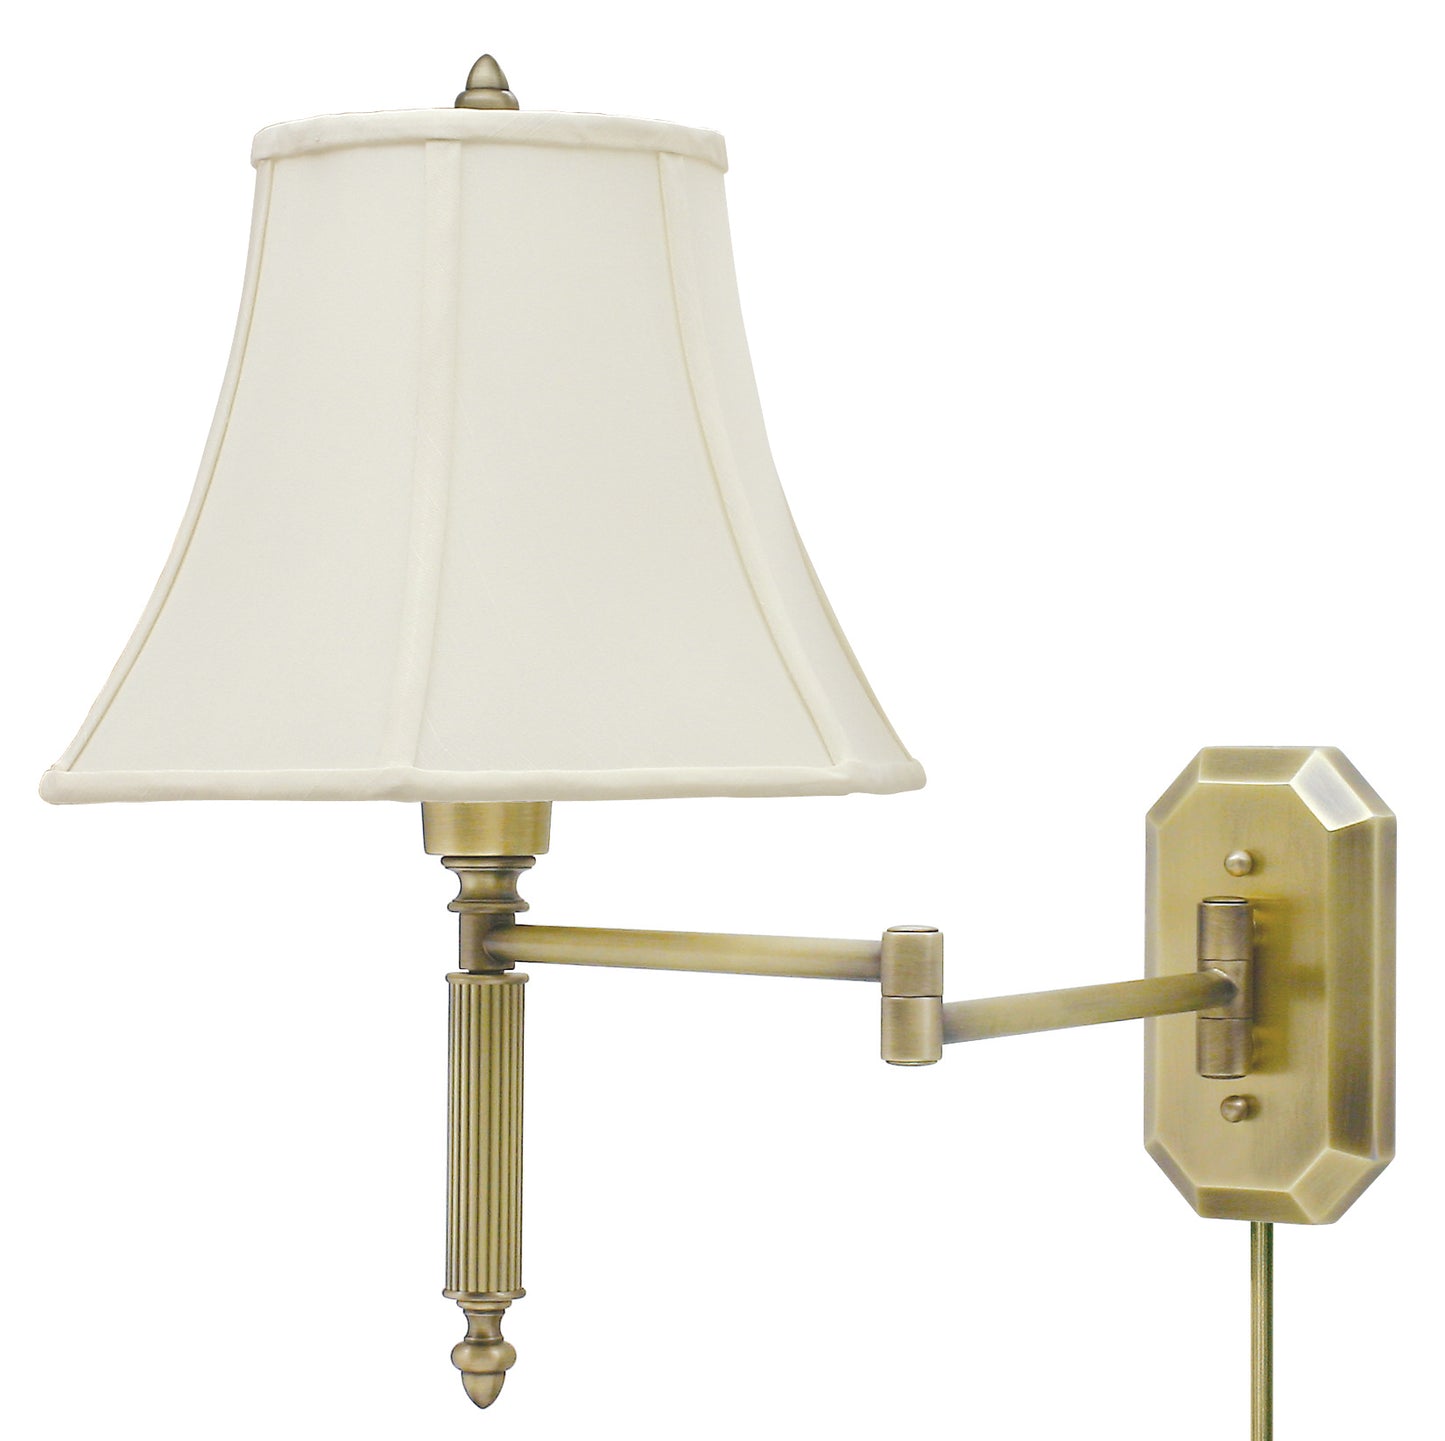 House of Troy Wall Swing Arm Lamp Antique Brass WS-706-AB